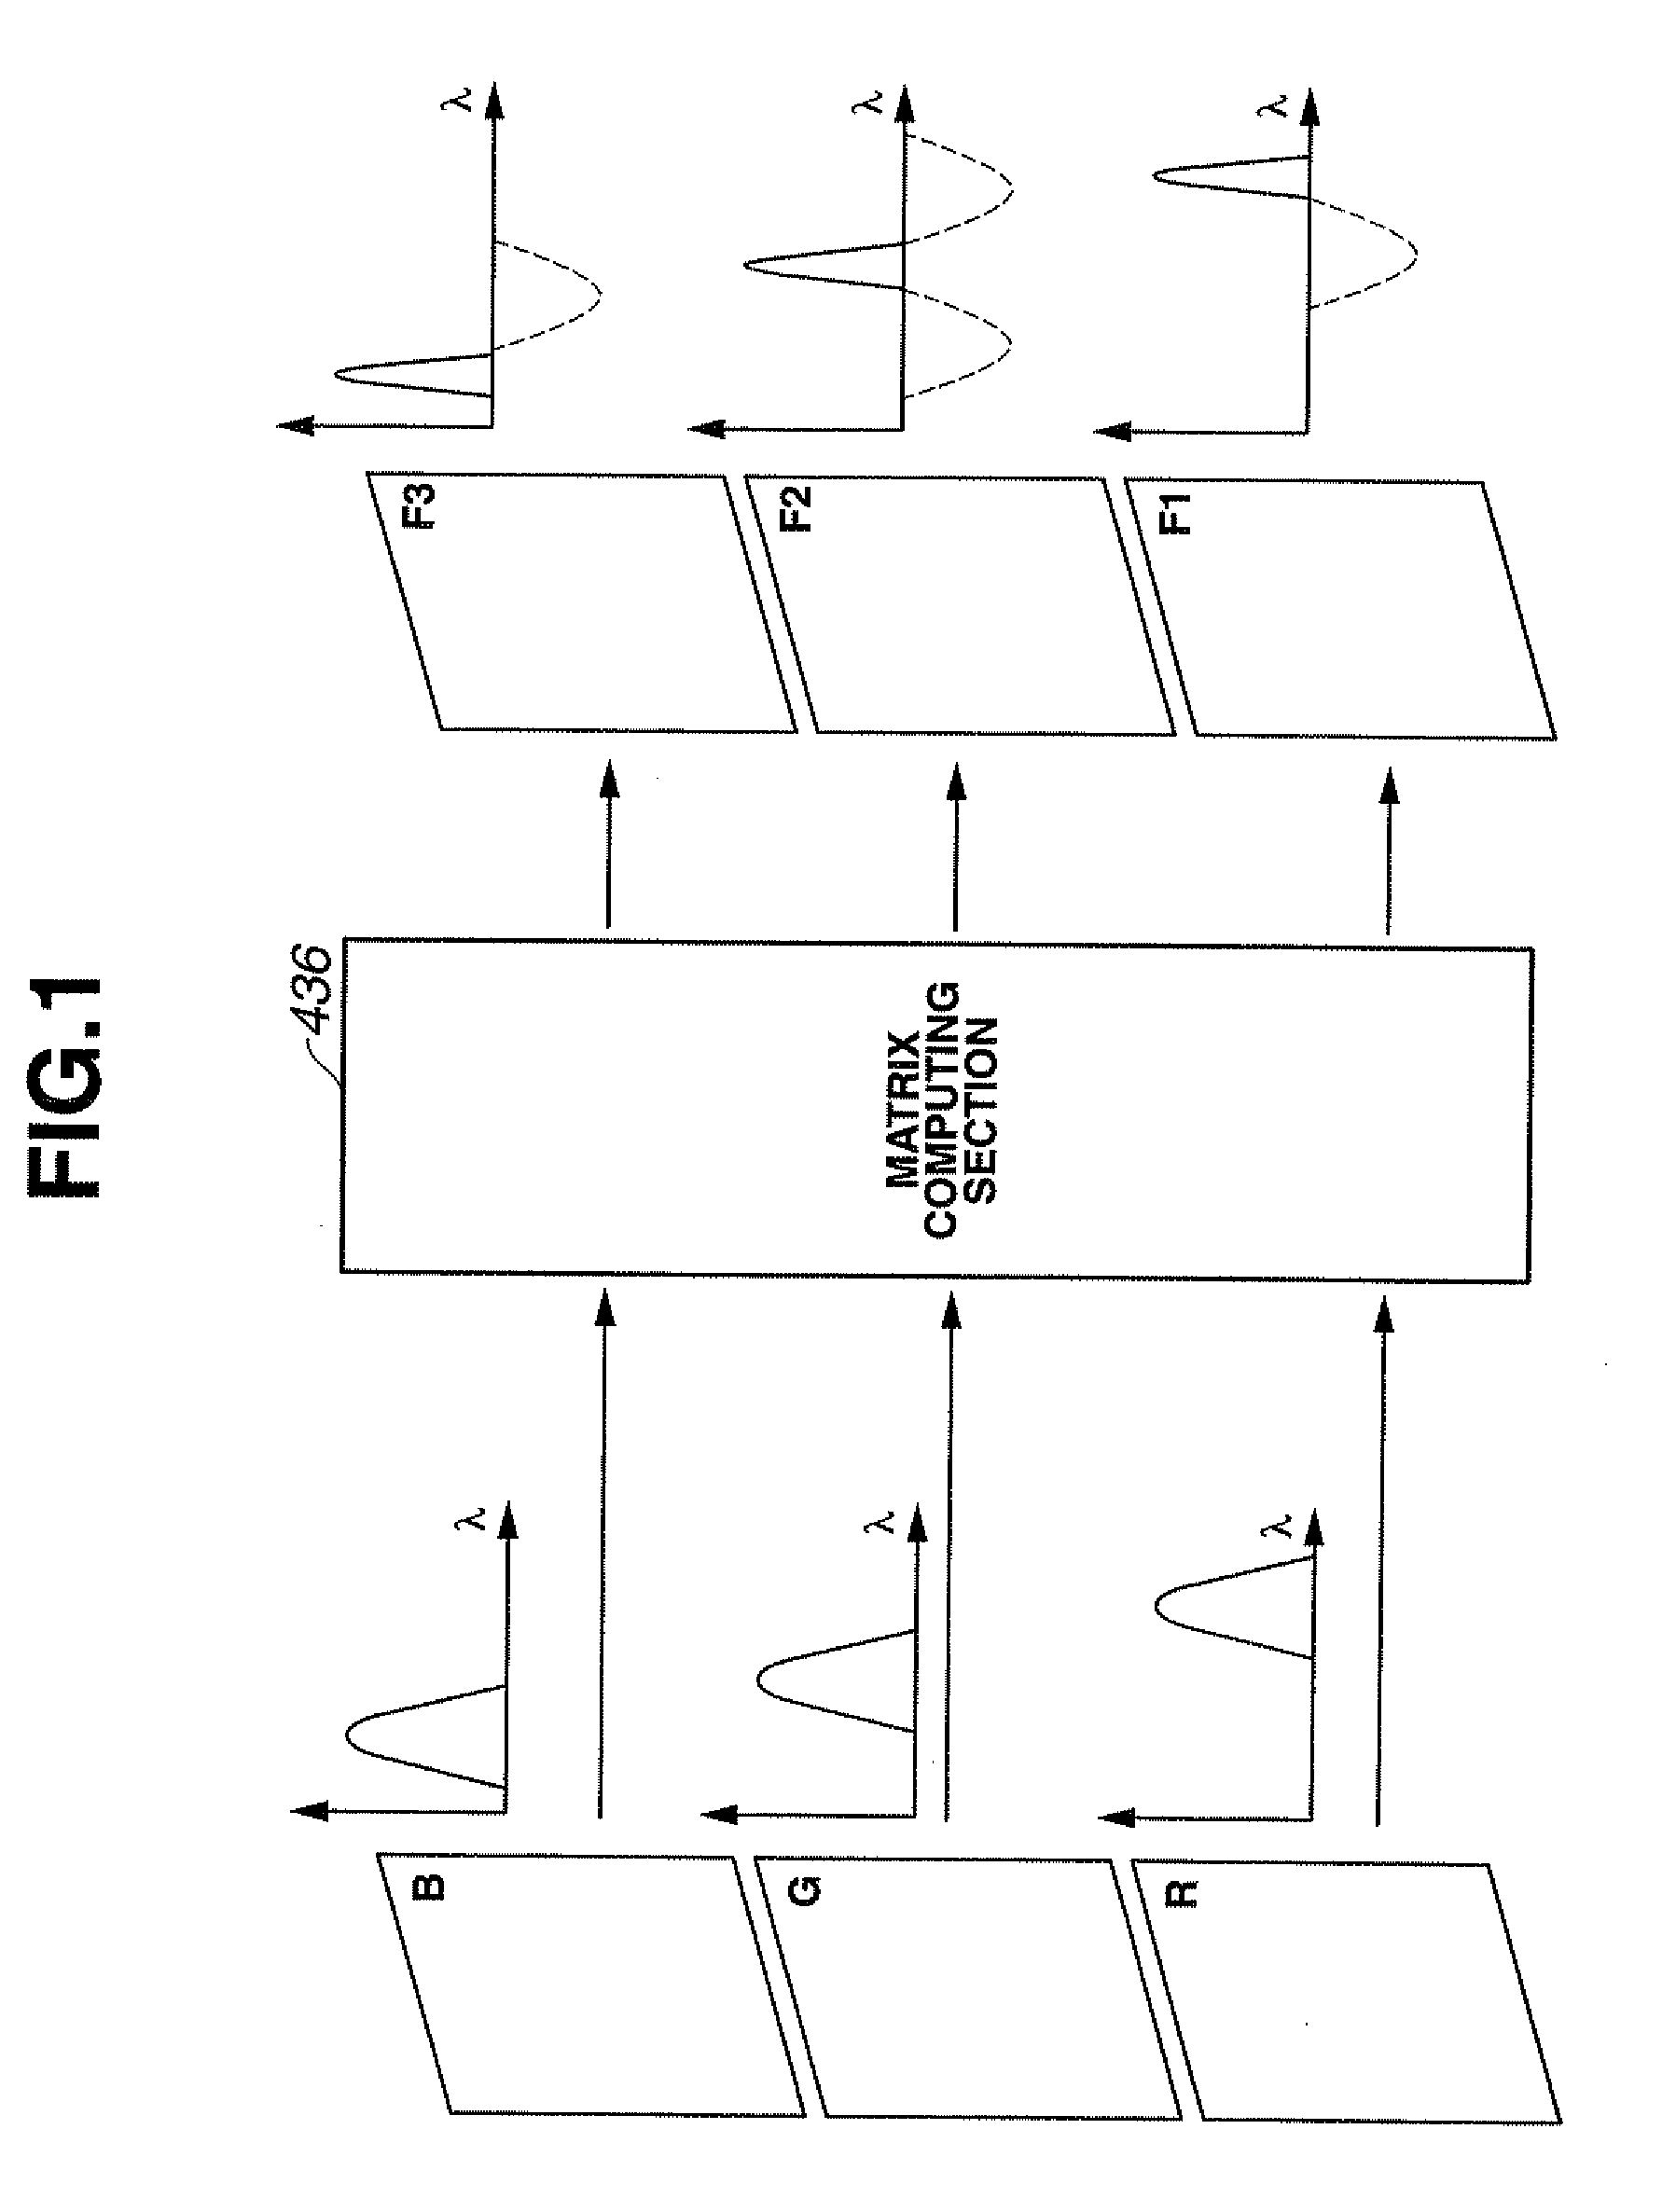 Signal processing device for biological observation apparatus